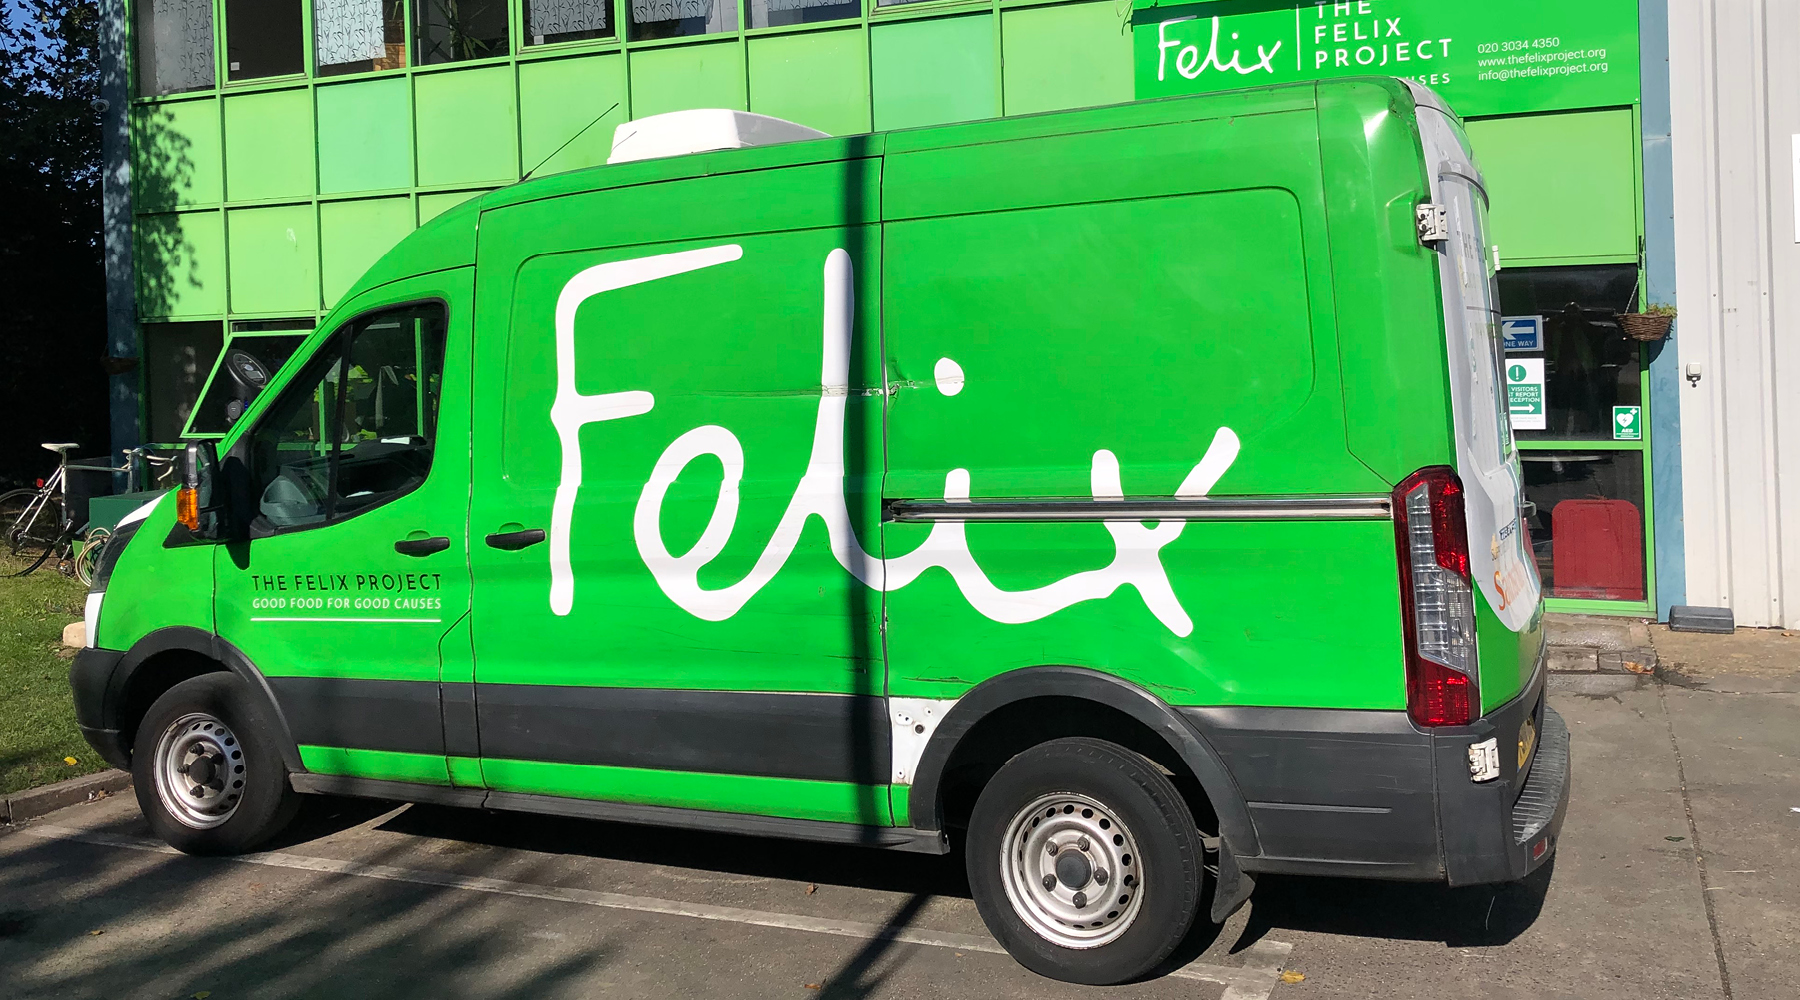 Bright green Felix van with the name written over one side and a volunteer wearing a high visibility jacket and a green top loading donated goods into the van